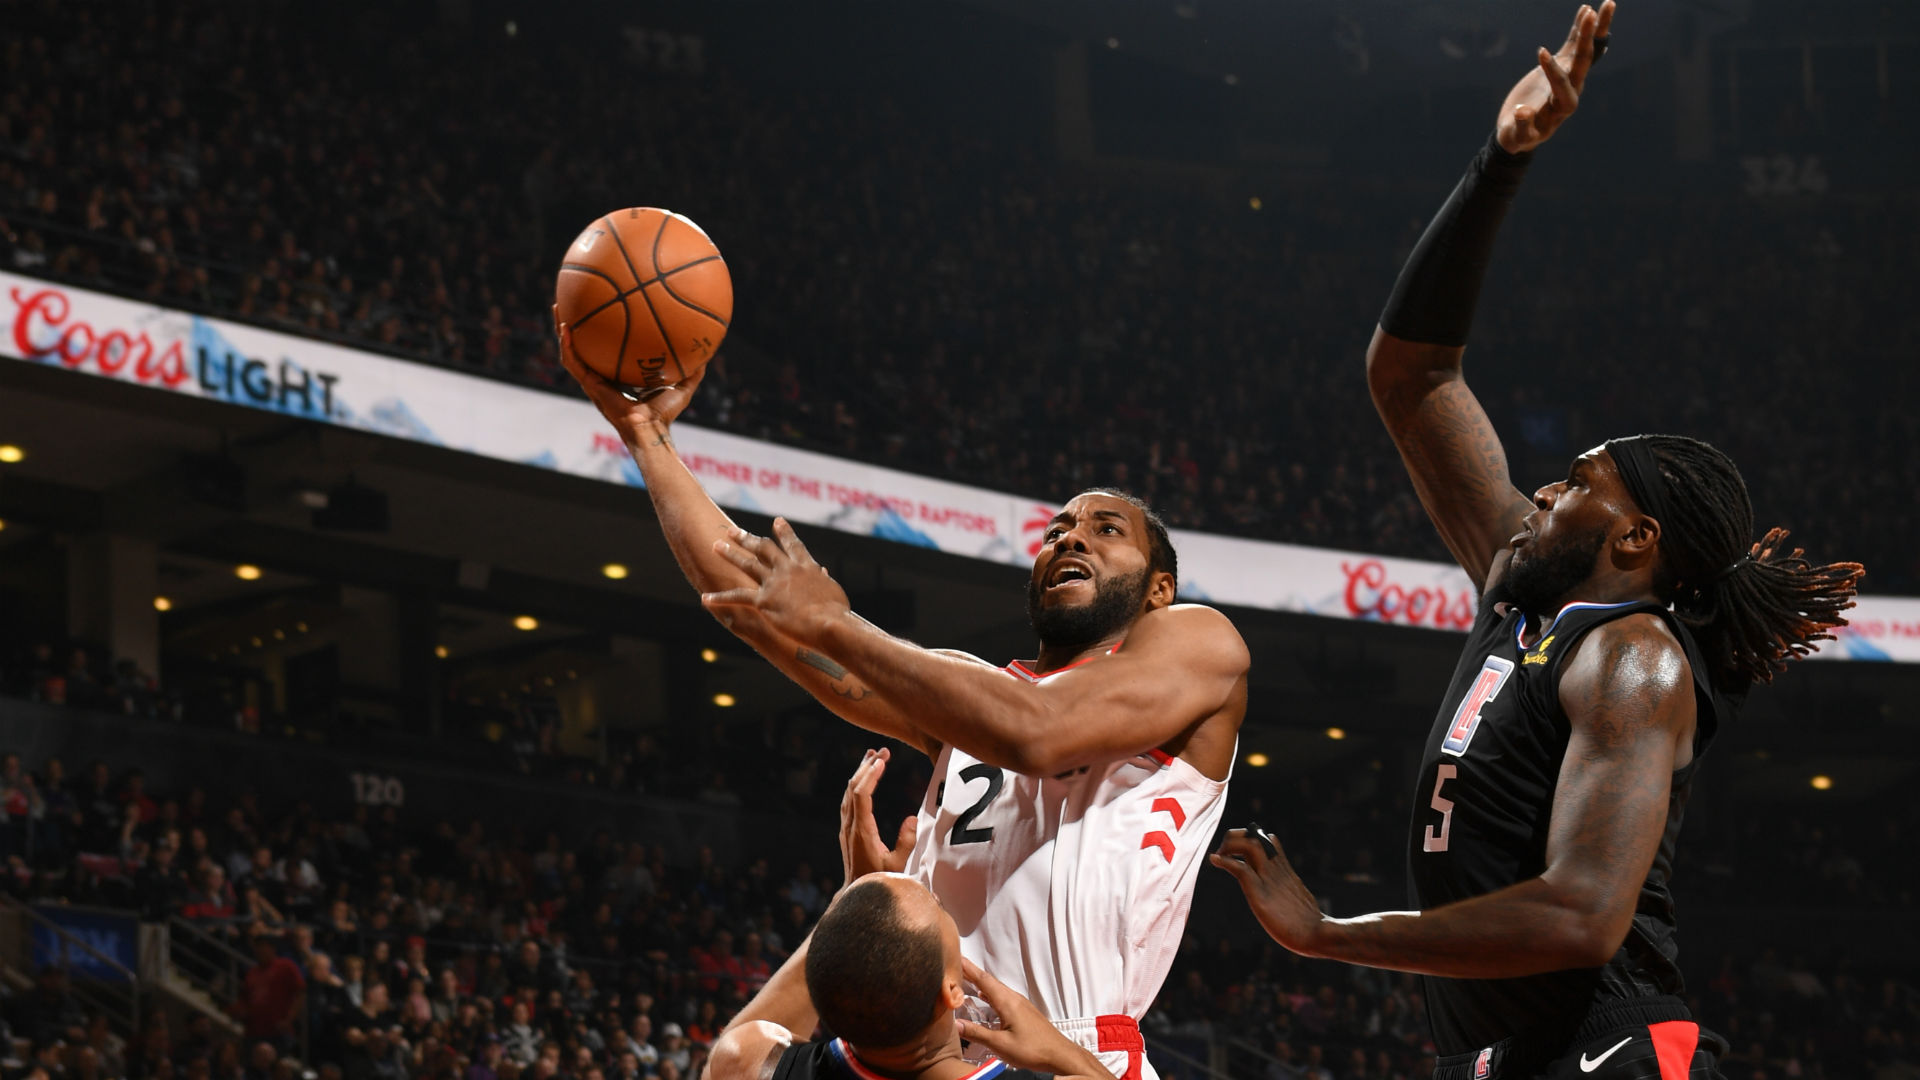 Kawhi Leonard's 18 points lead Raptors to 18-point win over Clippers | NBA.com Canada ...